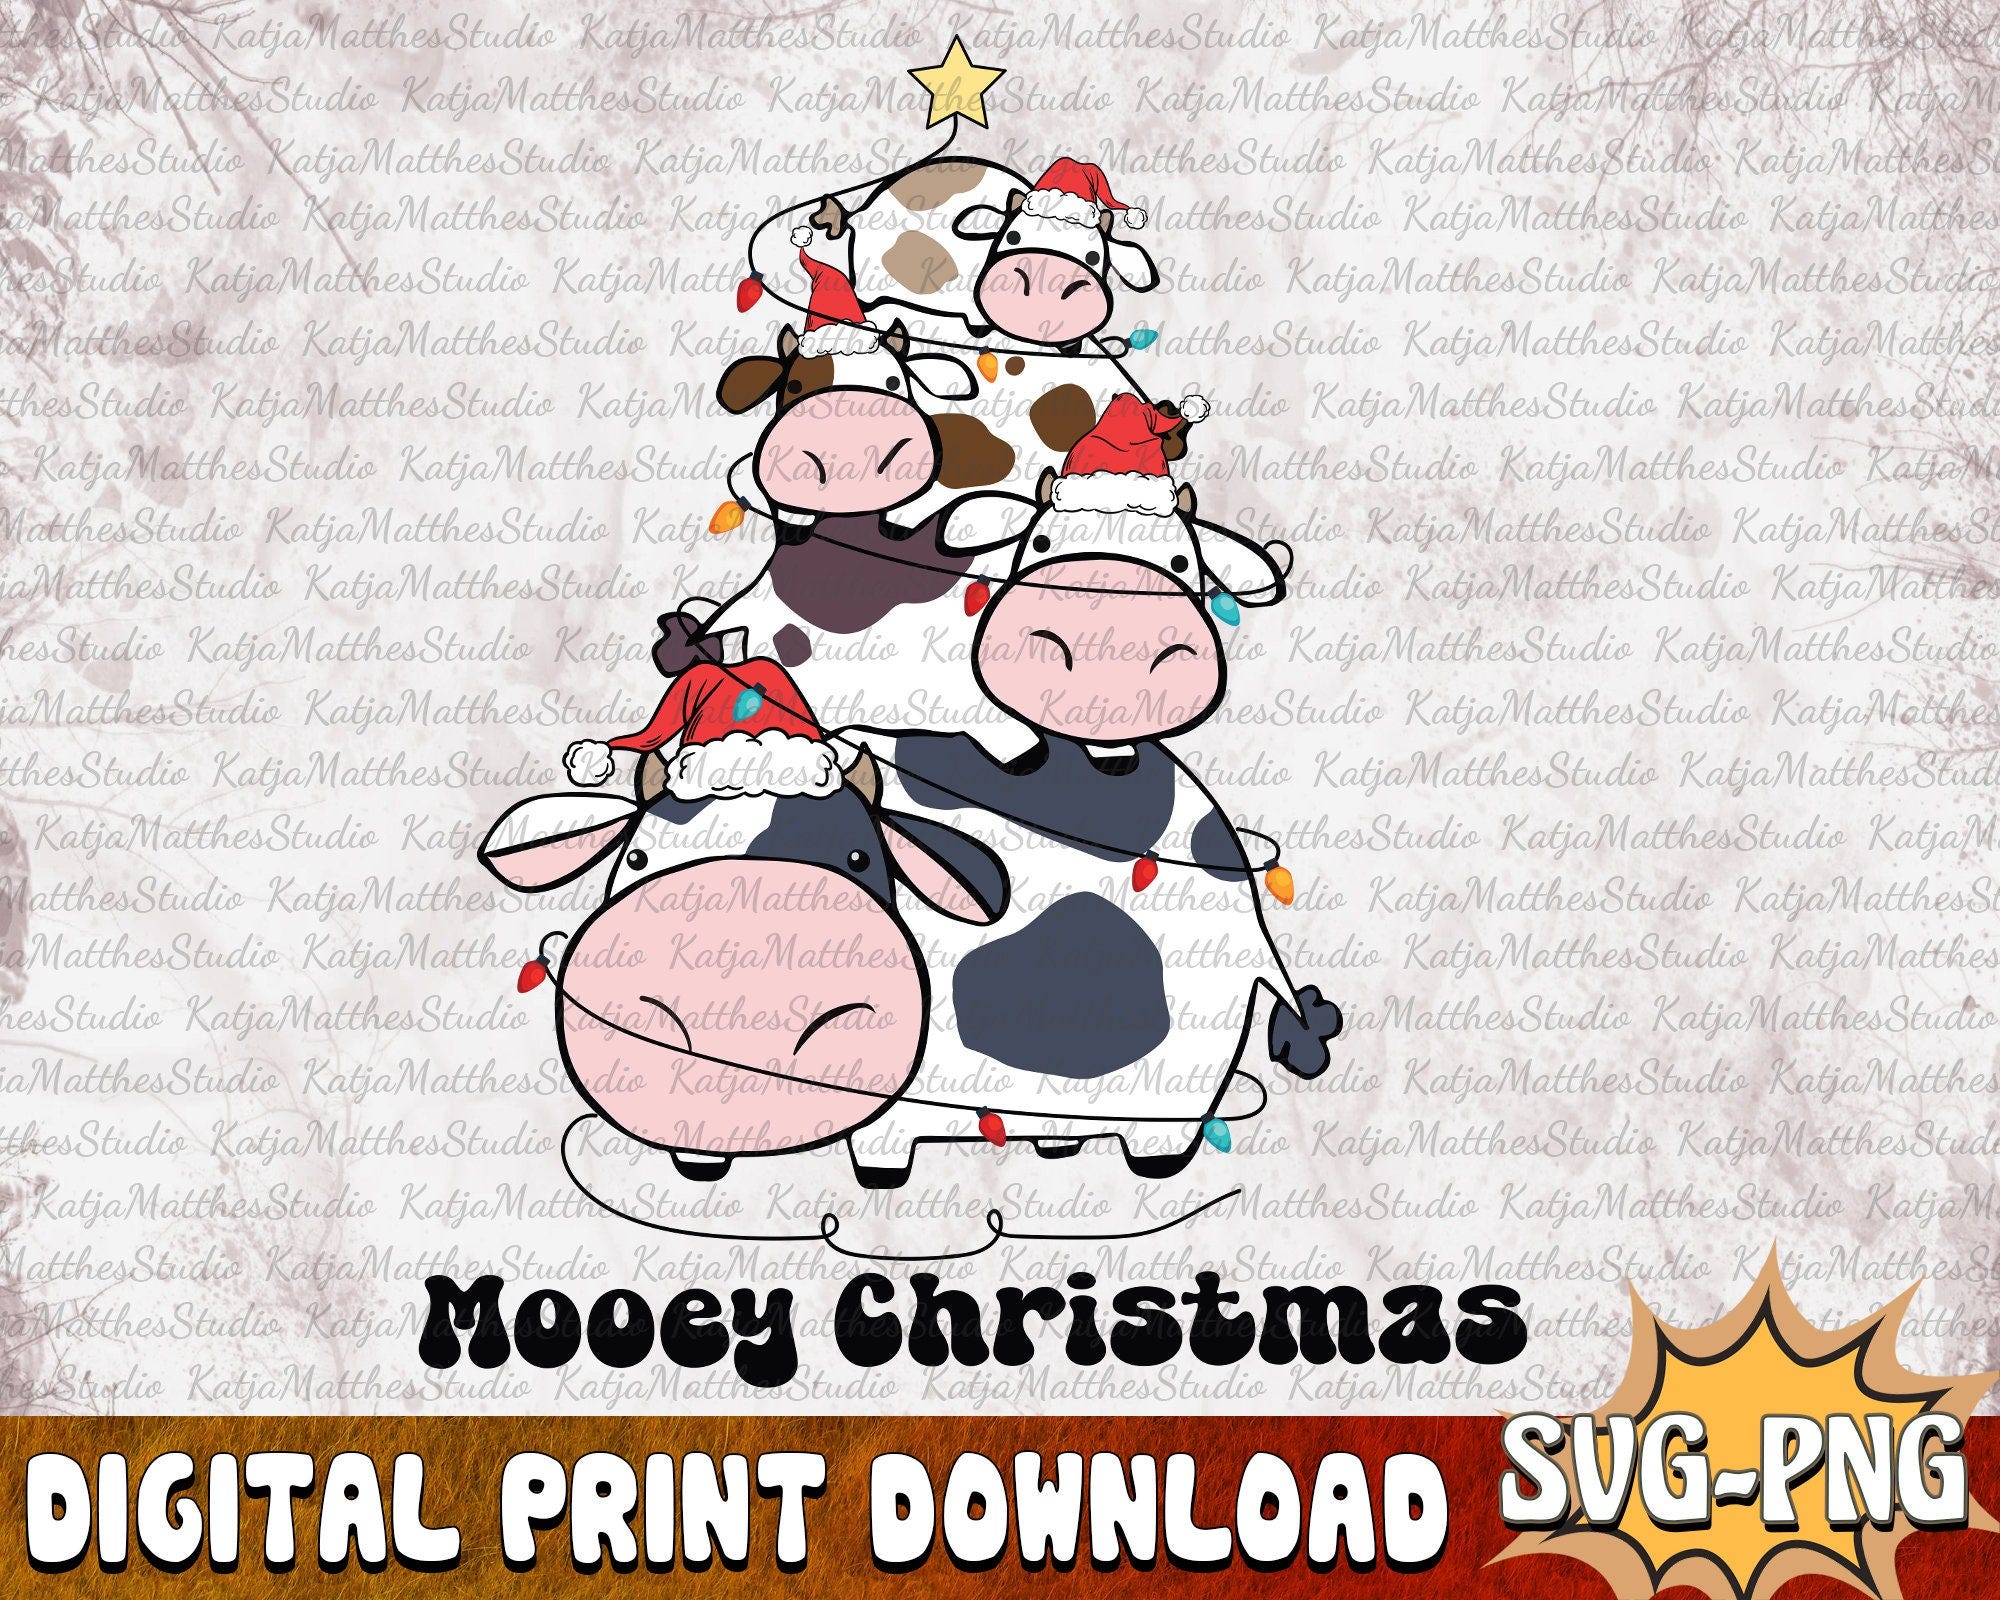 Mooey christmas tree svg, Mooey christmas png, Christmas cow svg, Mooey christmas shirt, Christmas cow clipart, png, Western christmas png